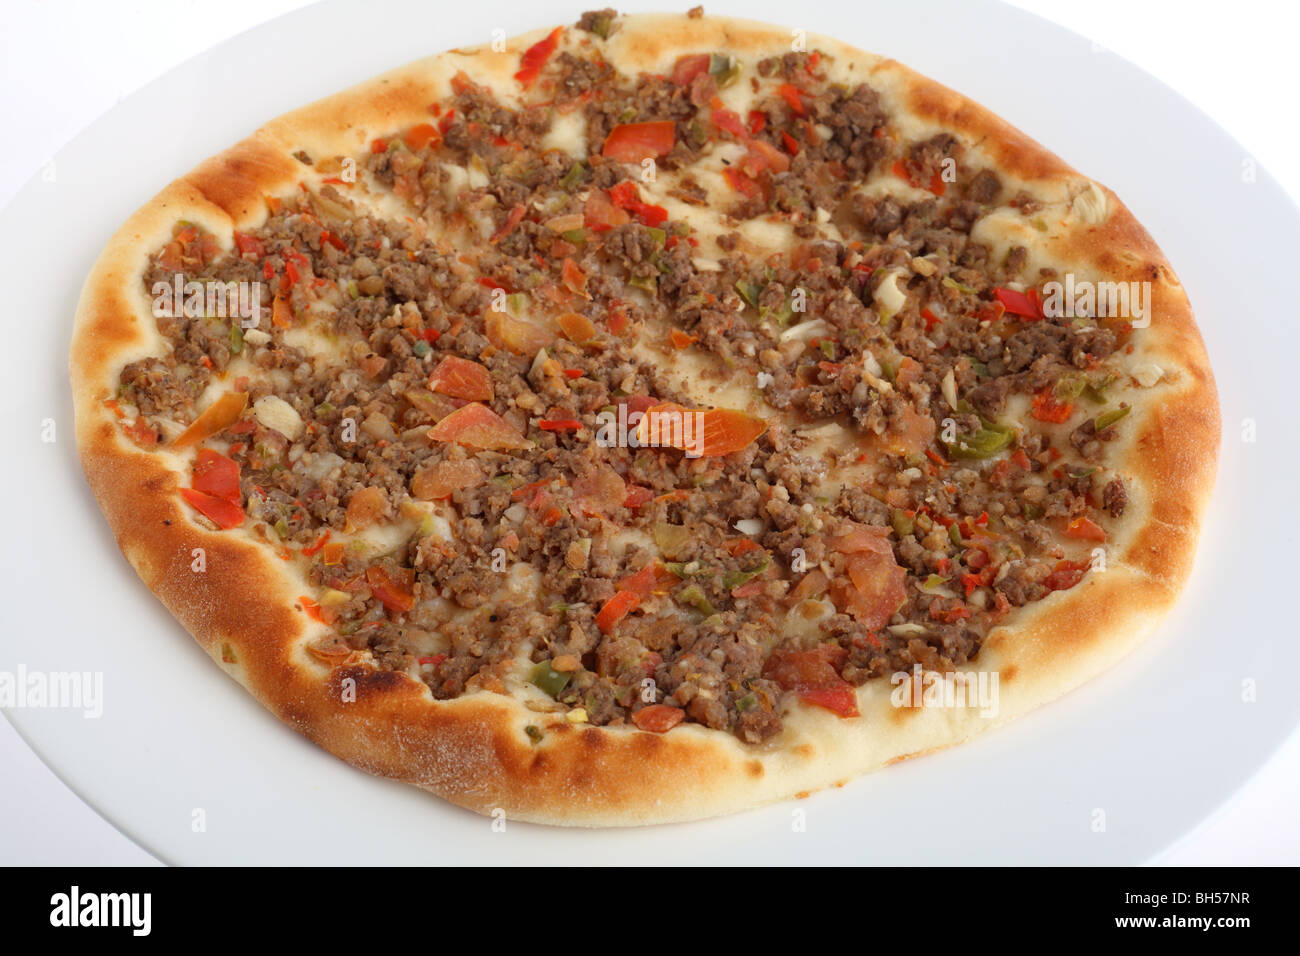 A fataya Arab bread, topped with meat and vegetable sauce before baking. Stock Photo